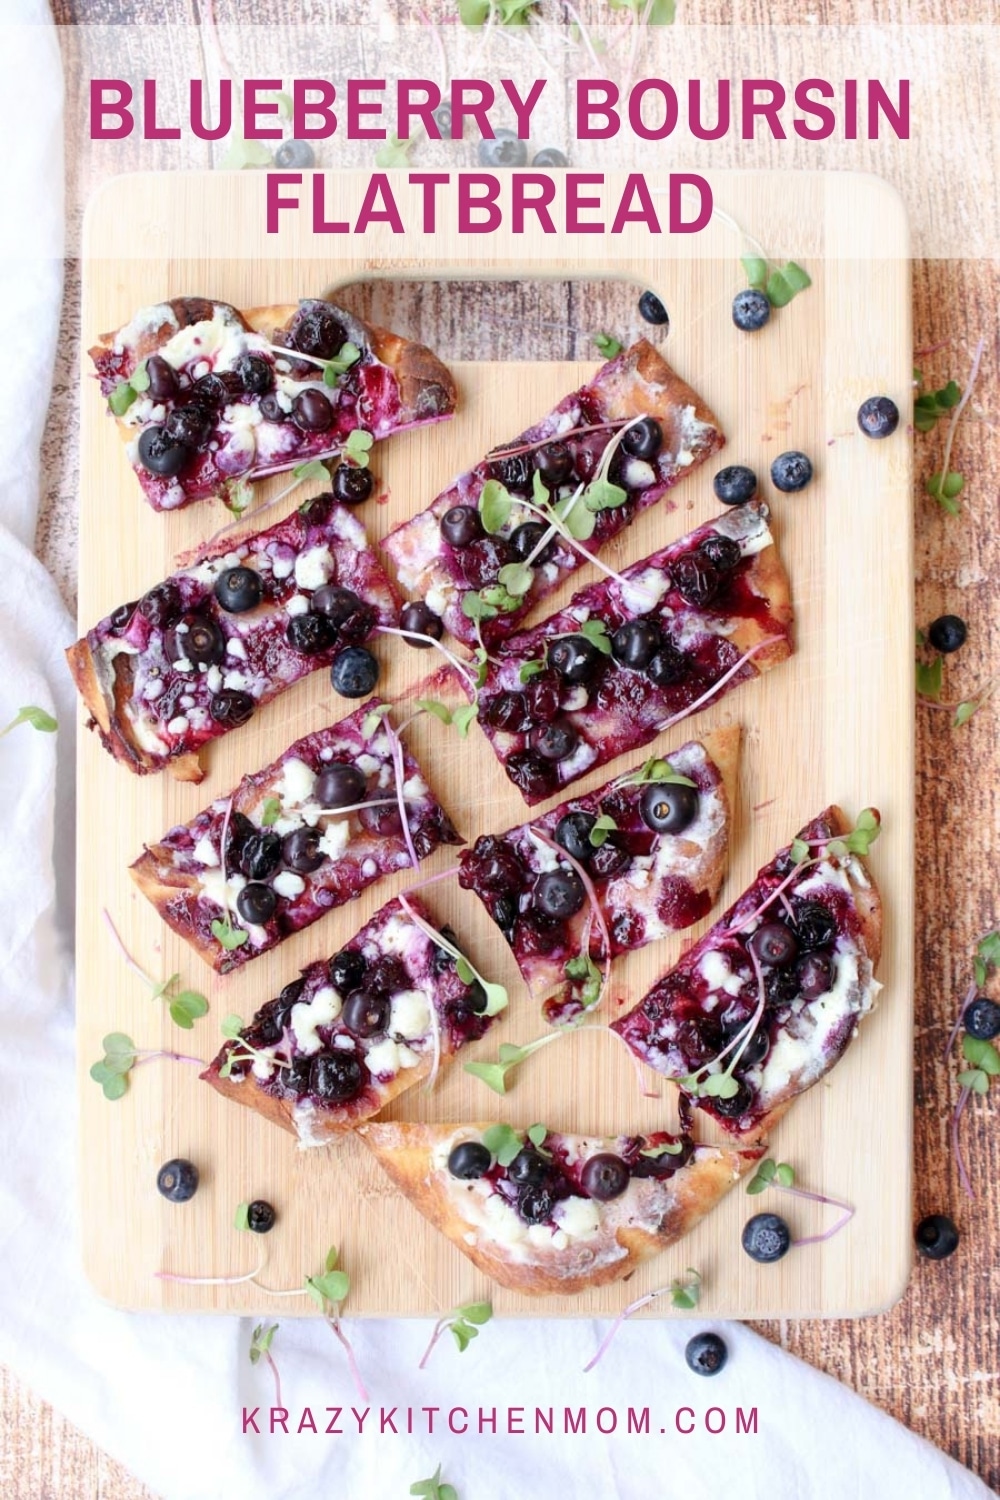 A sweet, tart, and savory flatbread that is ready in minutes using store-bought ingredients. Serve it as an appetizer or dessert. via @krazykitchenmom